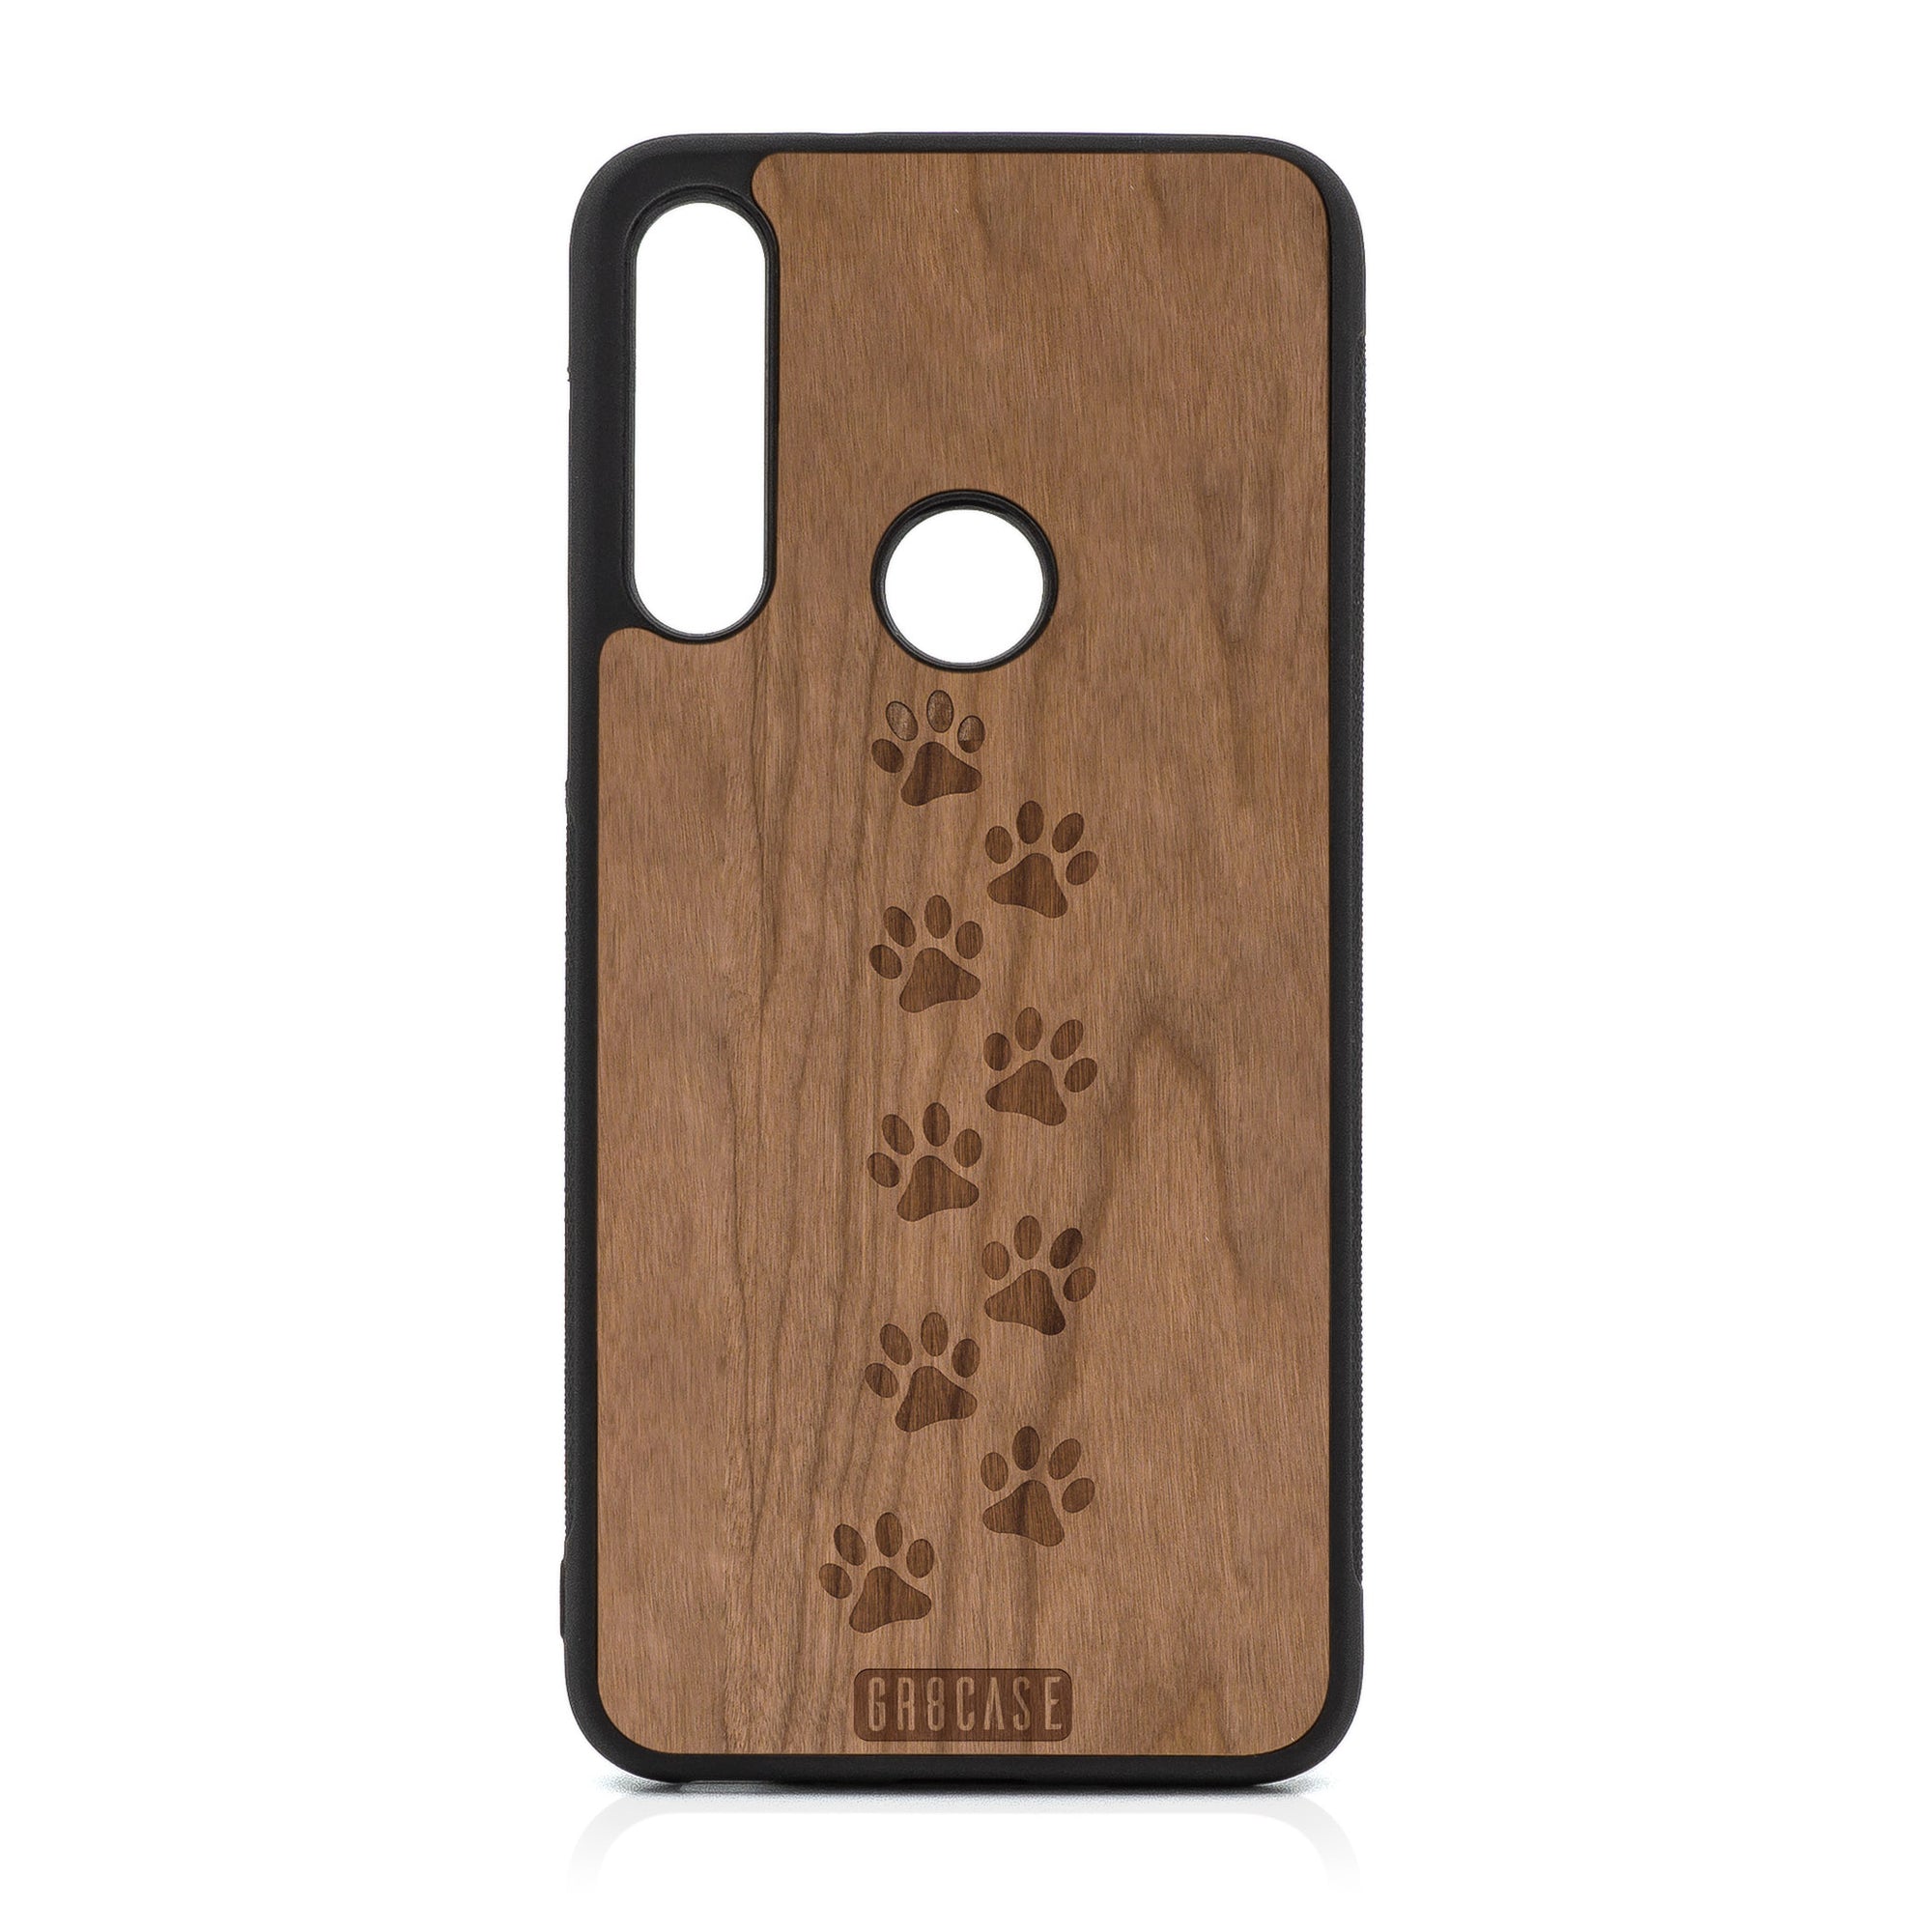 Paw Prints Design Wood Case For Moto G Fast